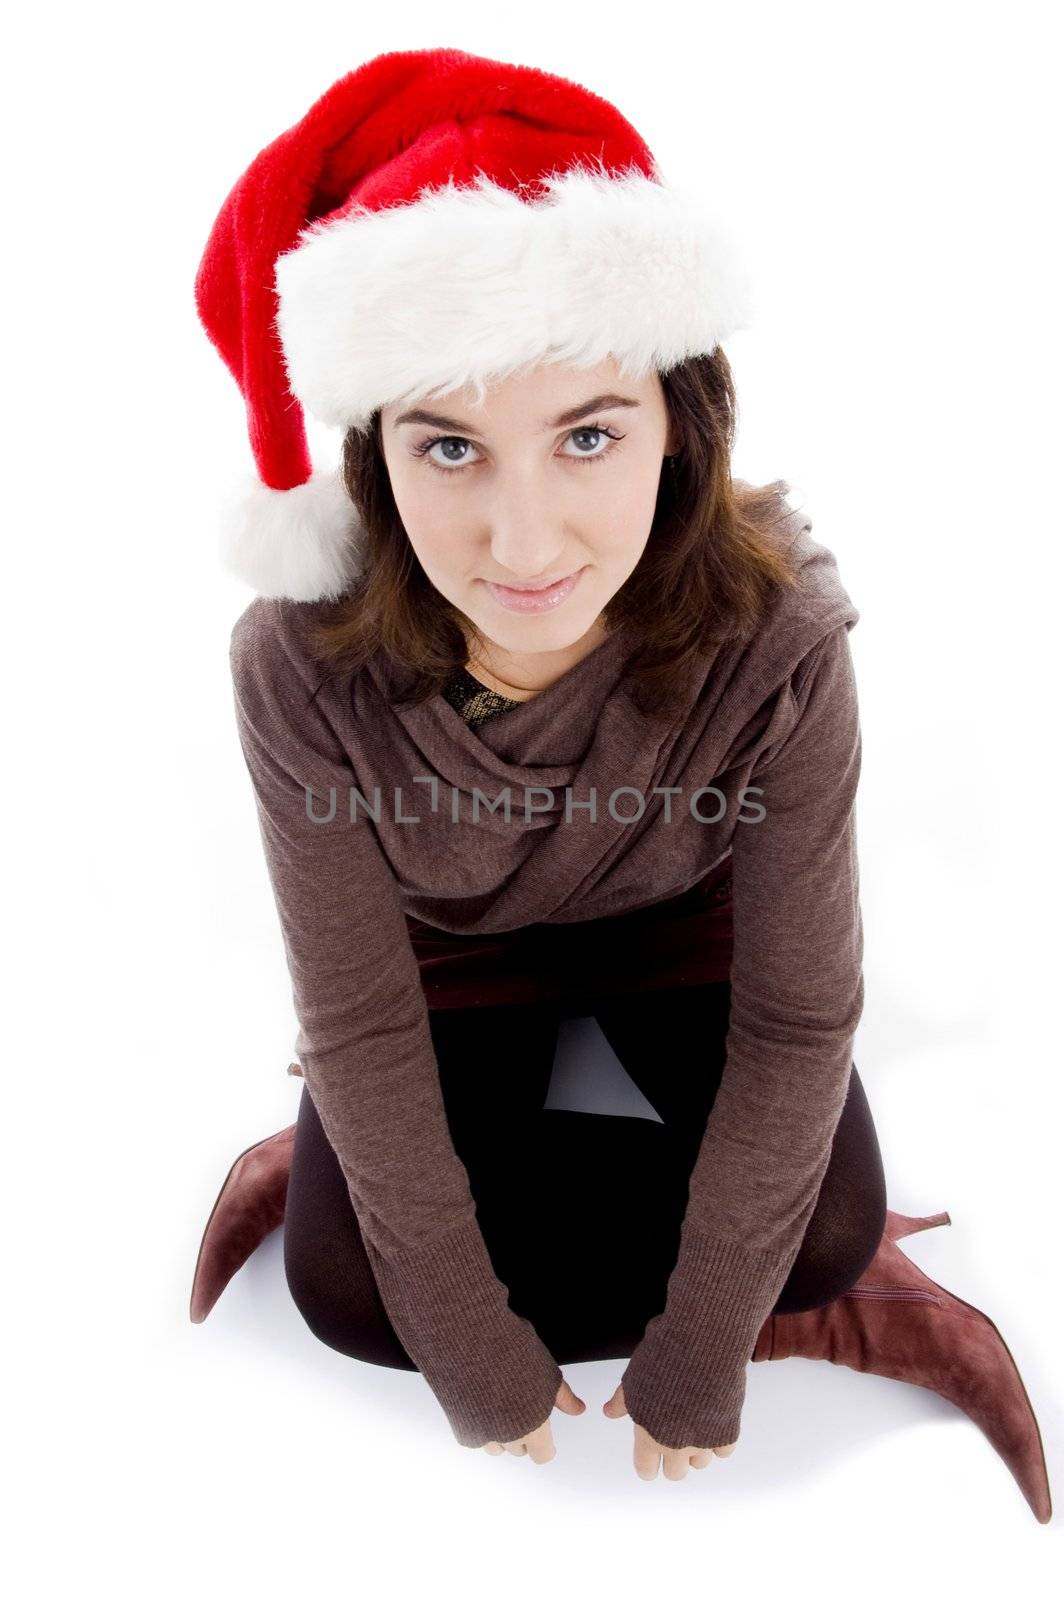 female in christmas hat sitting on floor by imagerymajestic